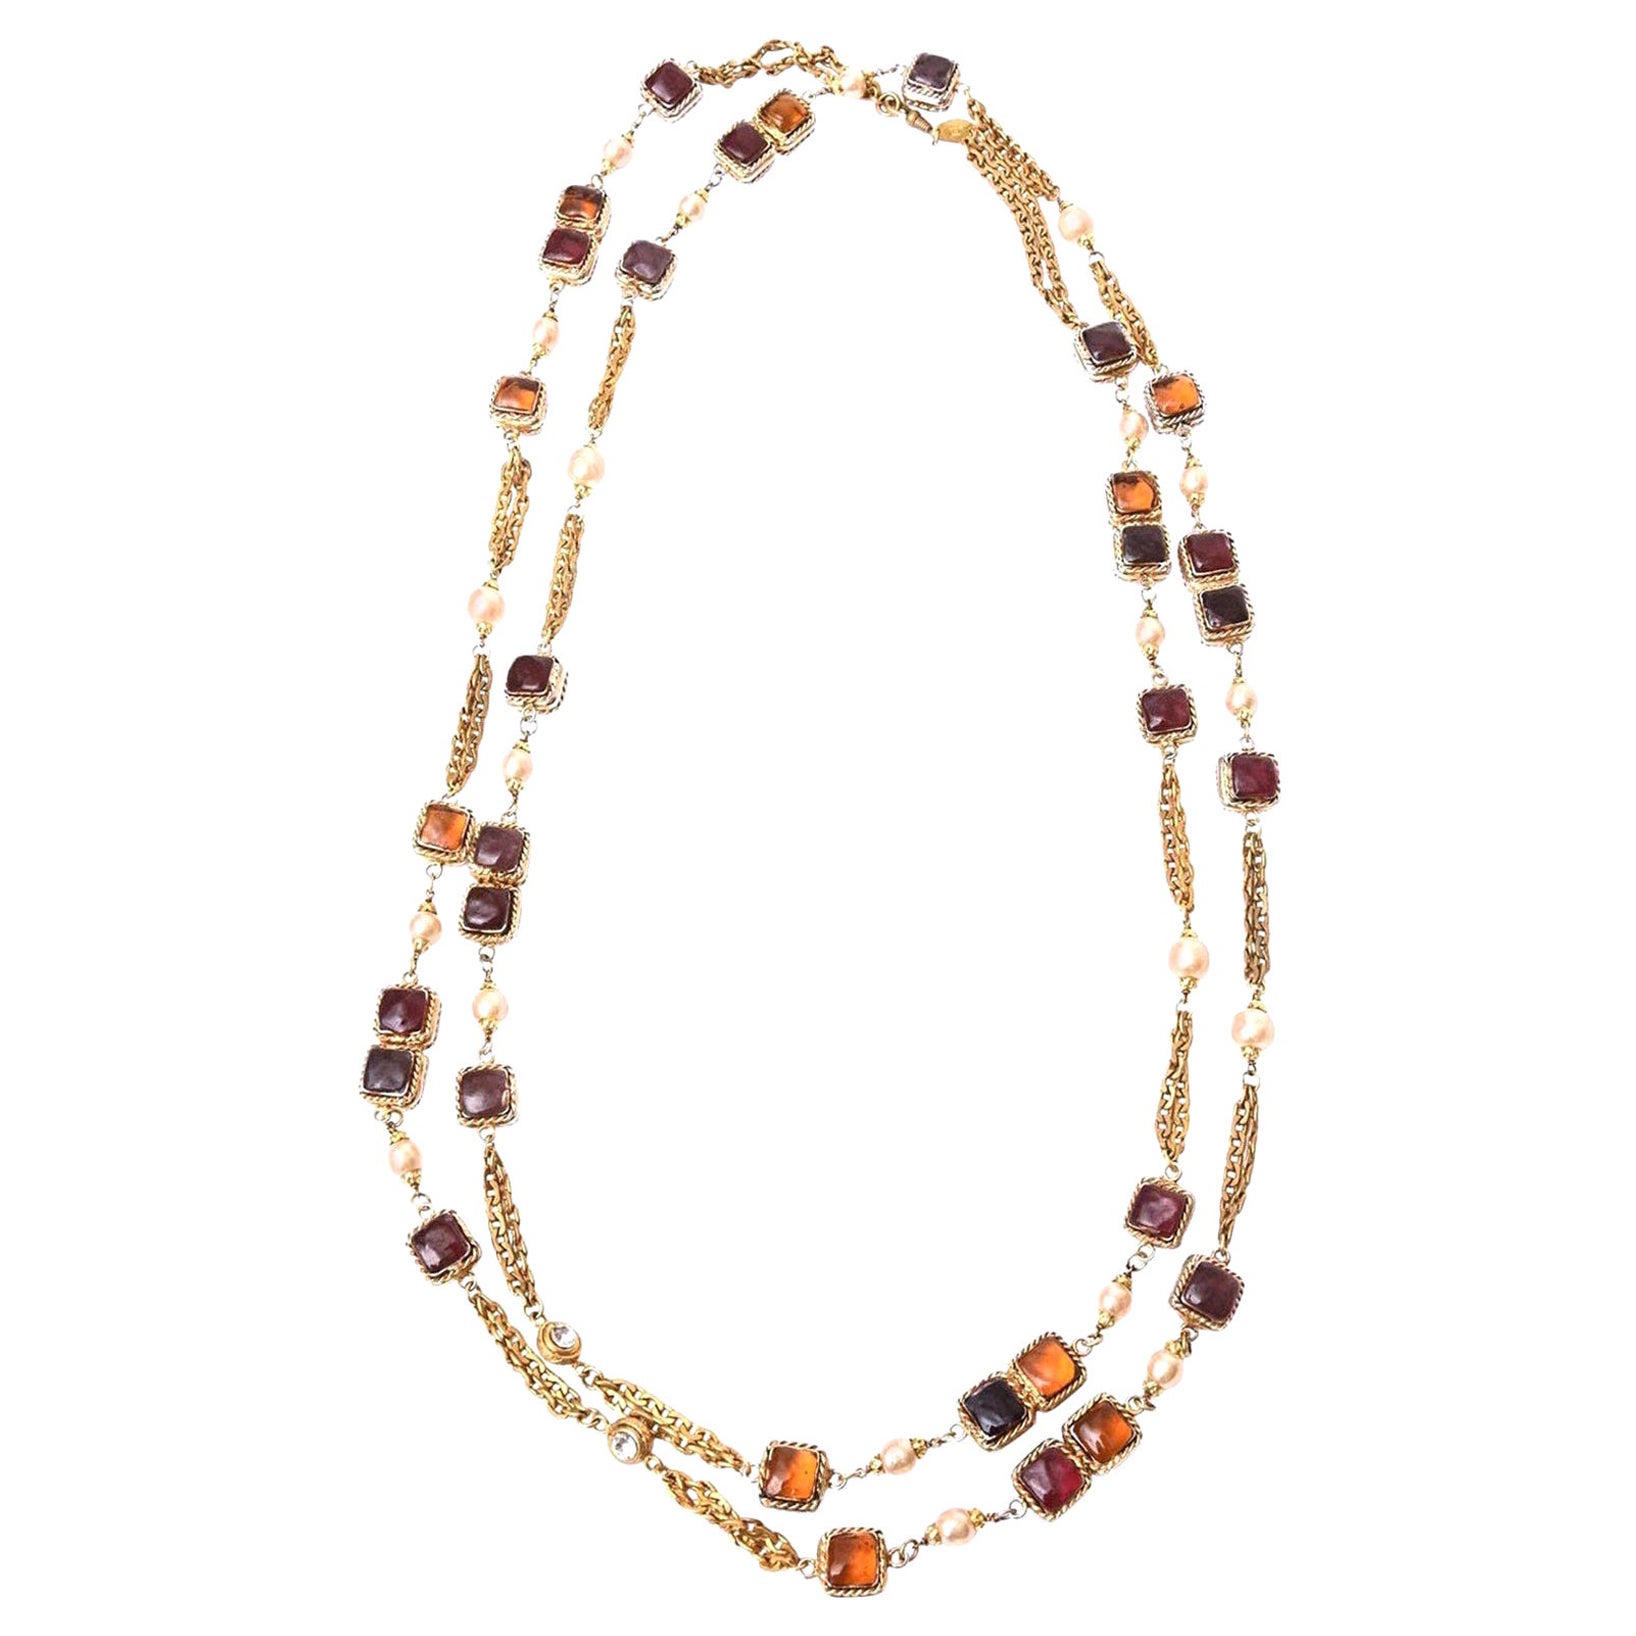 Chanel Rare Gripoix Purple, Pink Amber Glass, Faux Pearl & Chain Strand Necklace